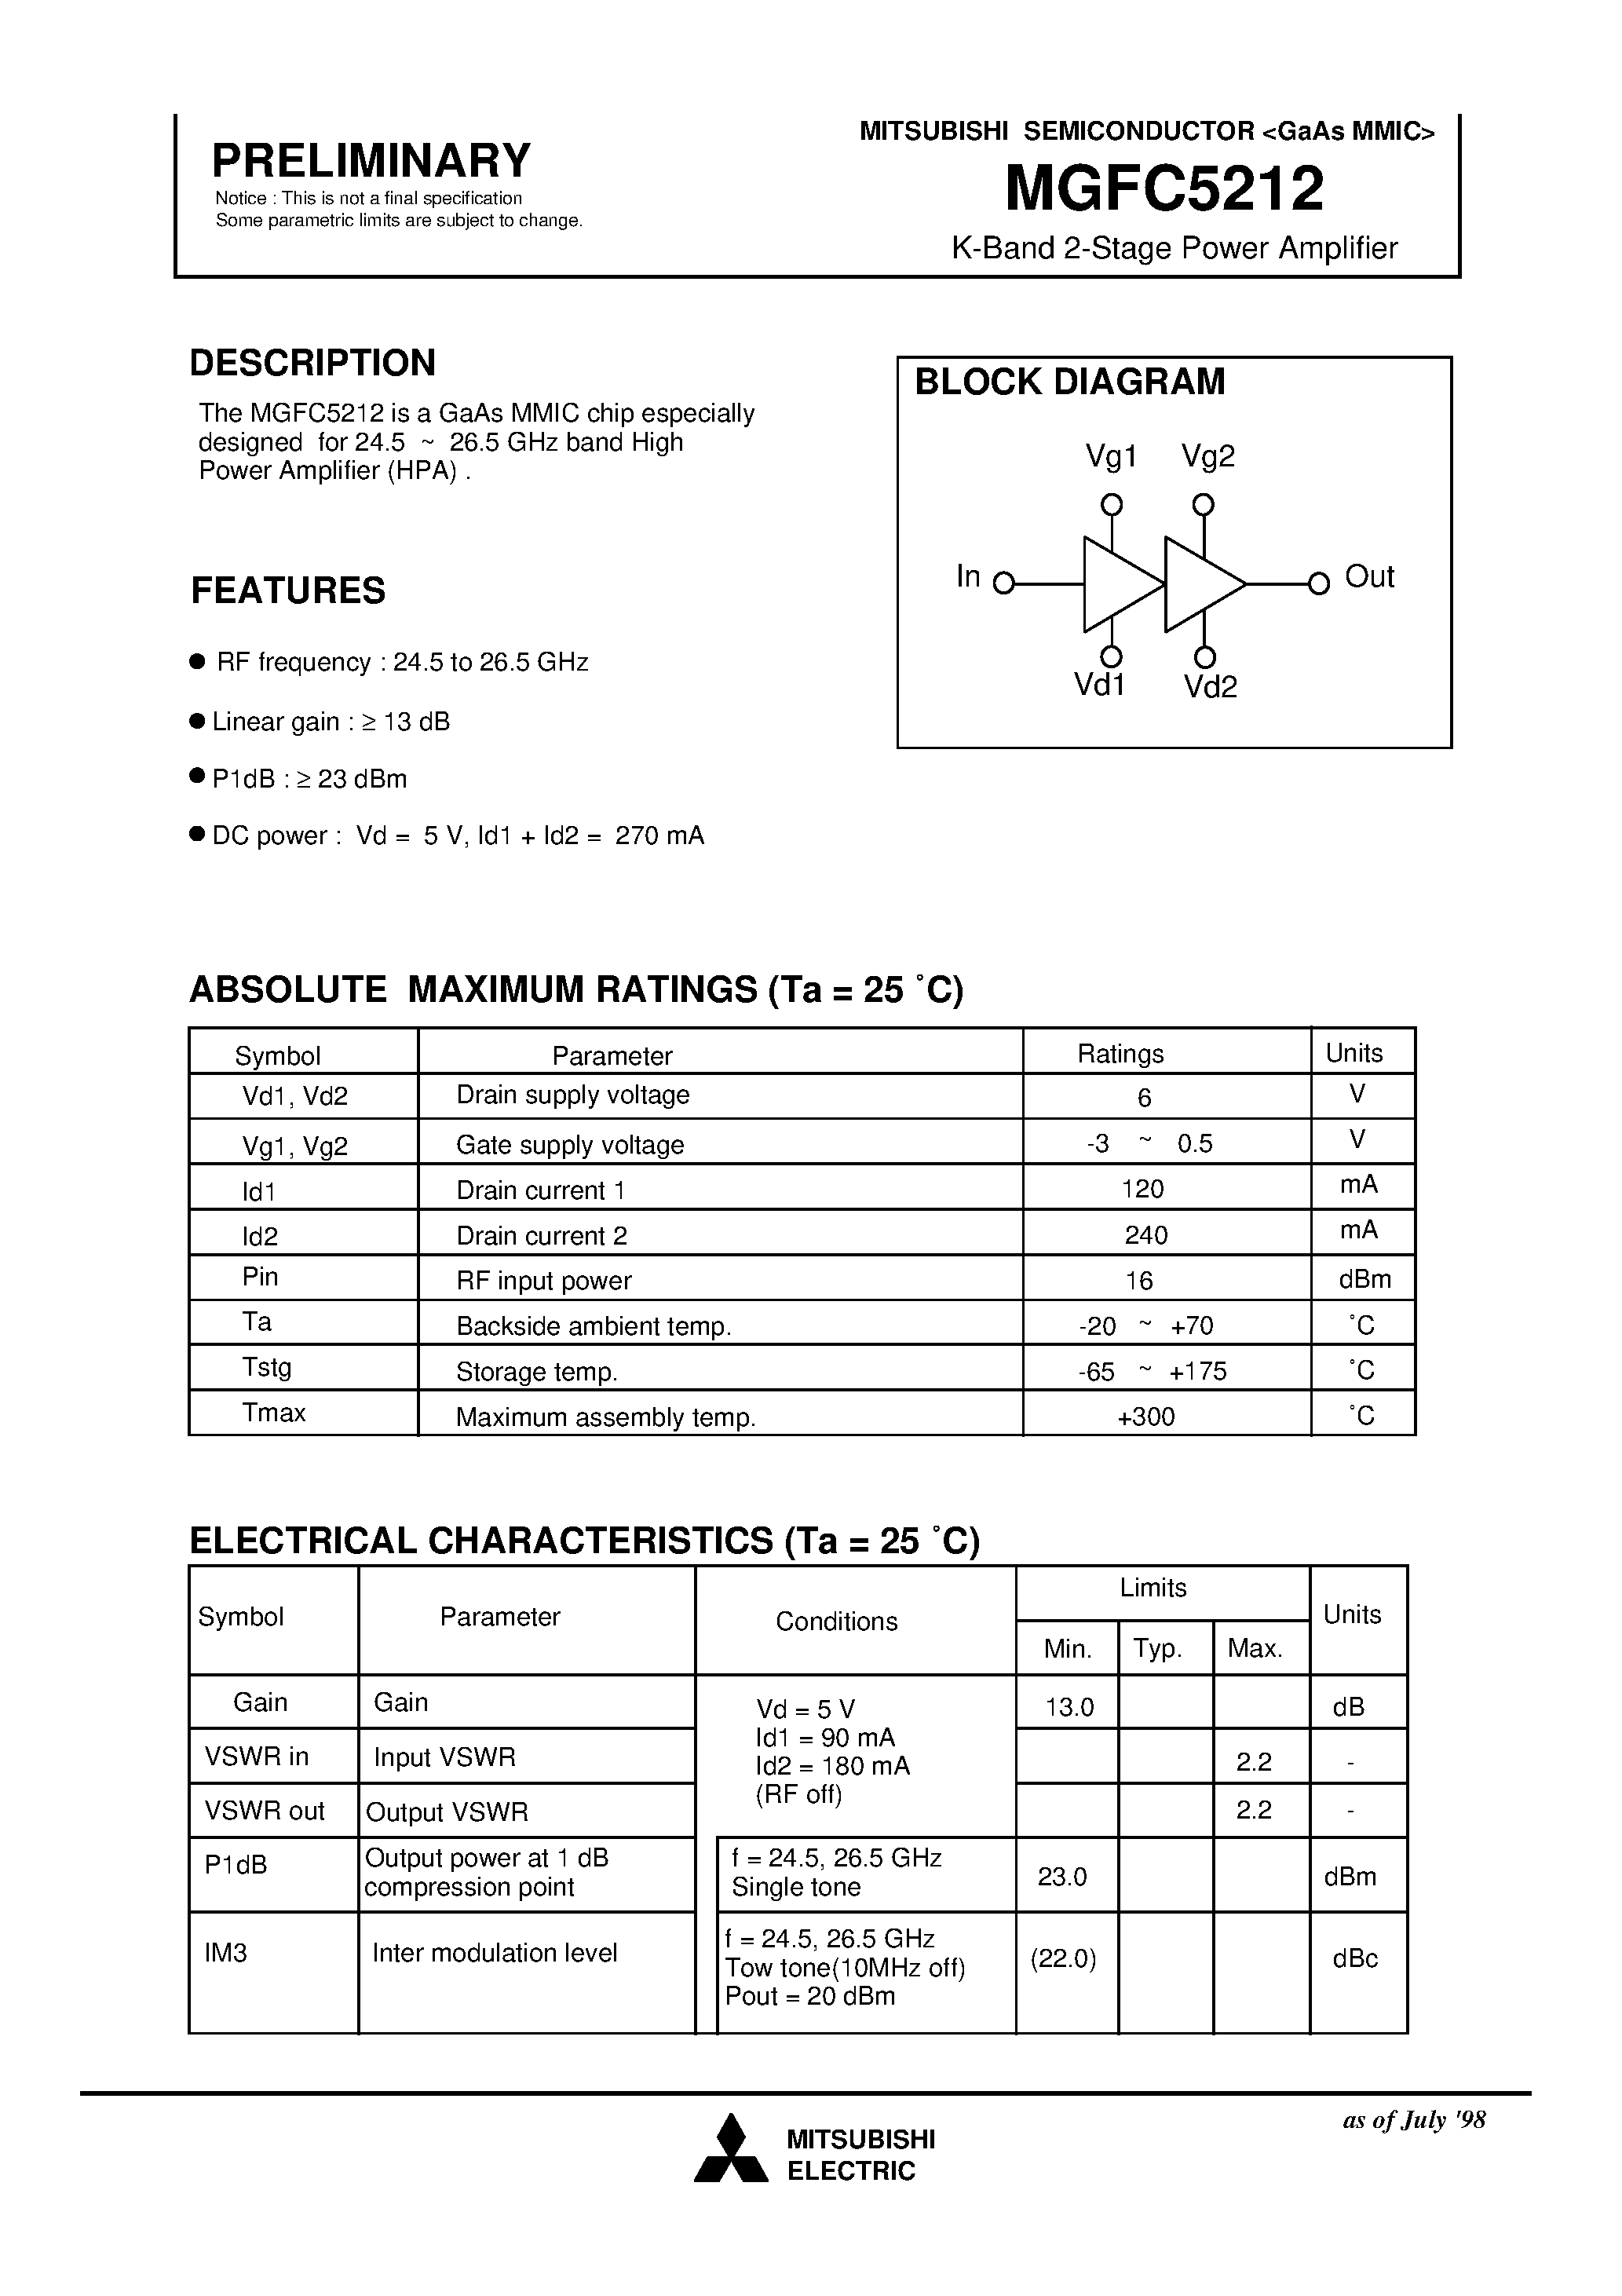 Datasheet MGFC5212 - K-Band 2-Stage Power Amplifier page 1